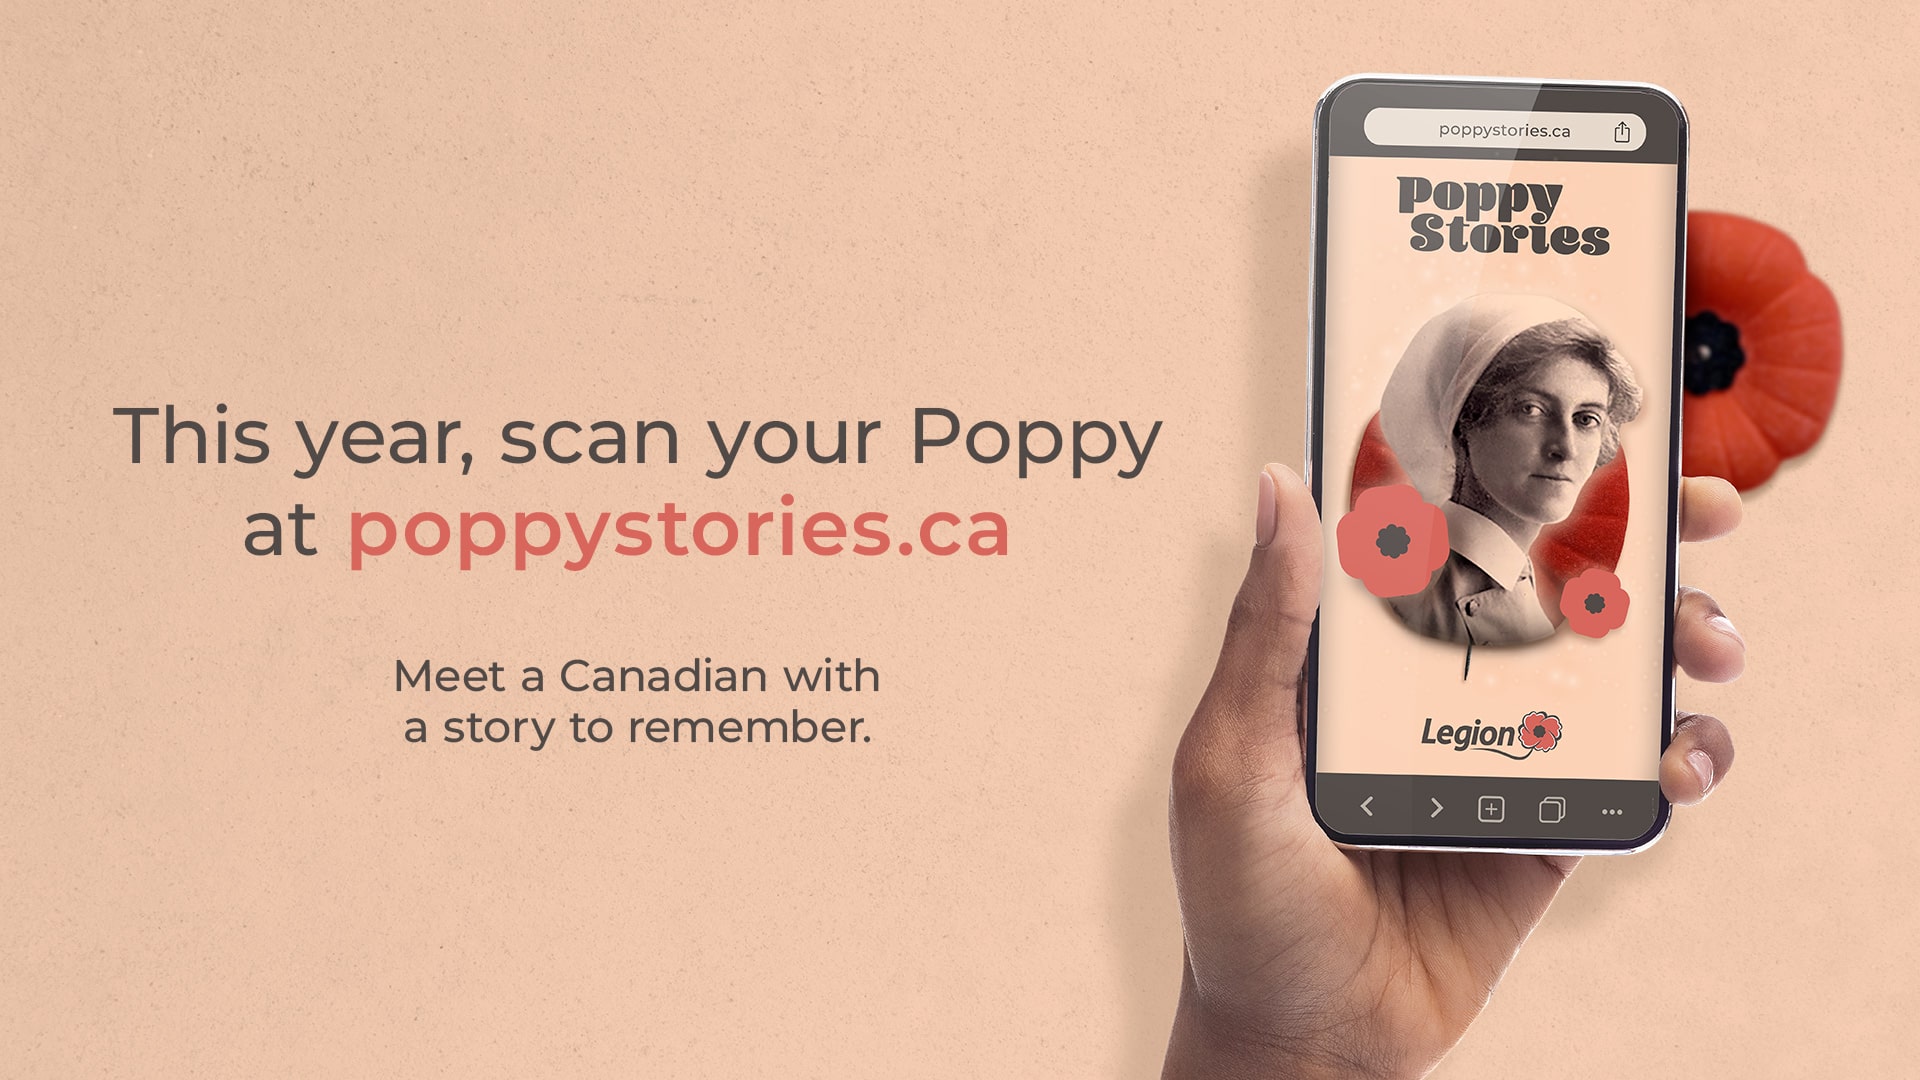 Advertisement of Poppy Stories application